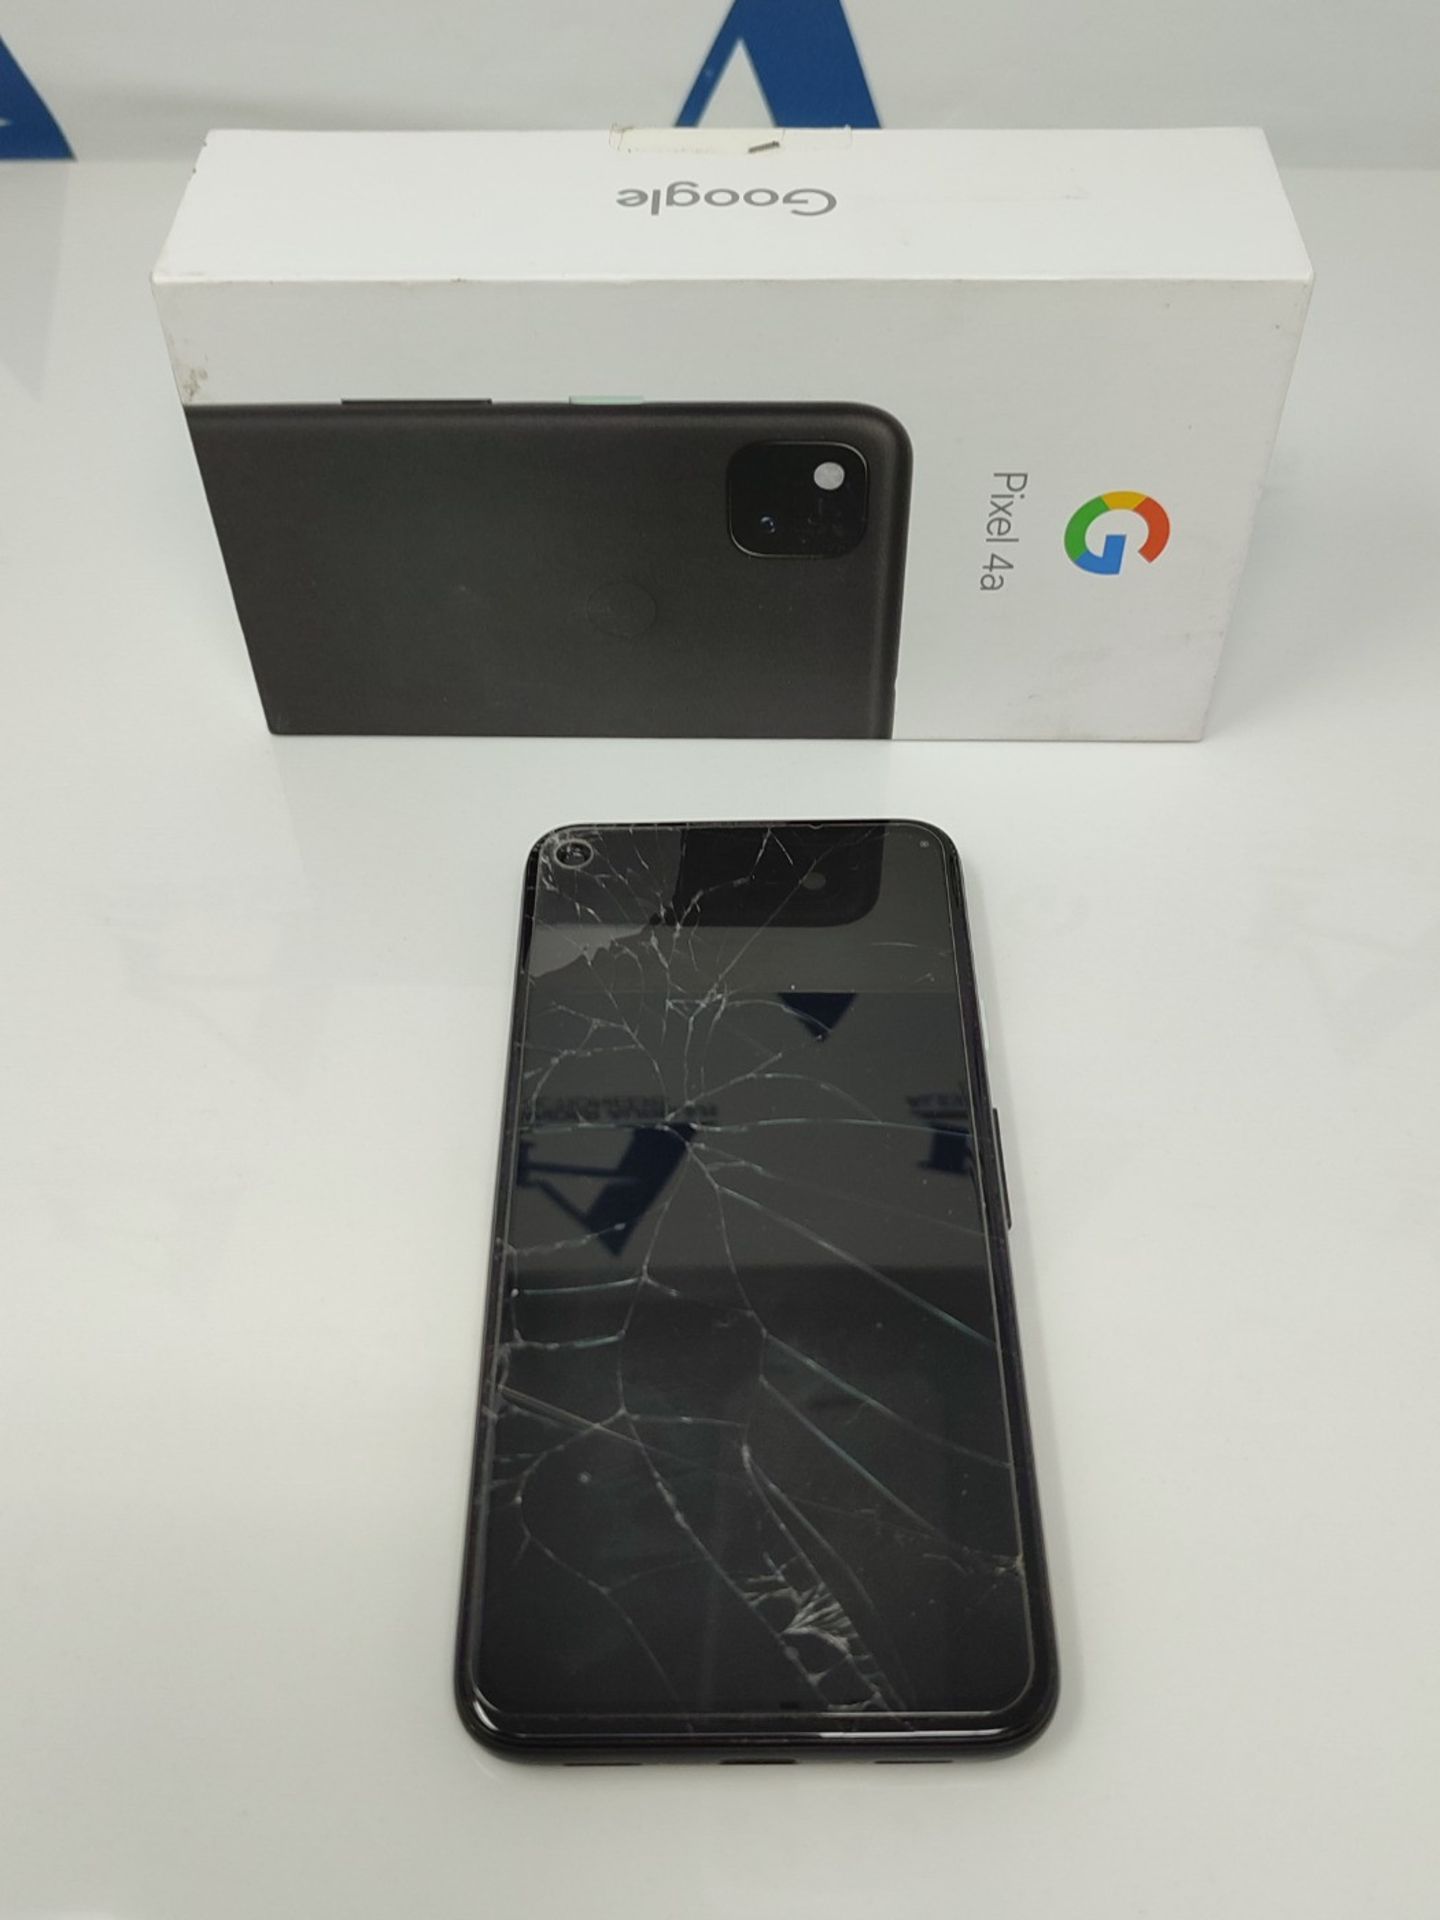 RRP £349.00 [Cracked] Google Pixel 4a Android Mobile Phone- Black, 128GB, 24 hour battery, Nightsi - Image 2 of 3